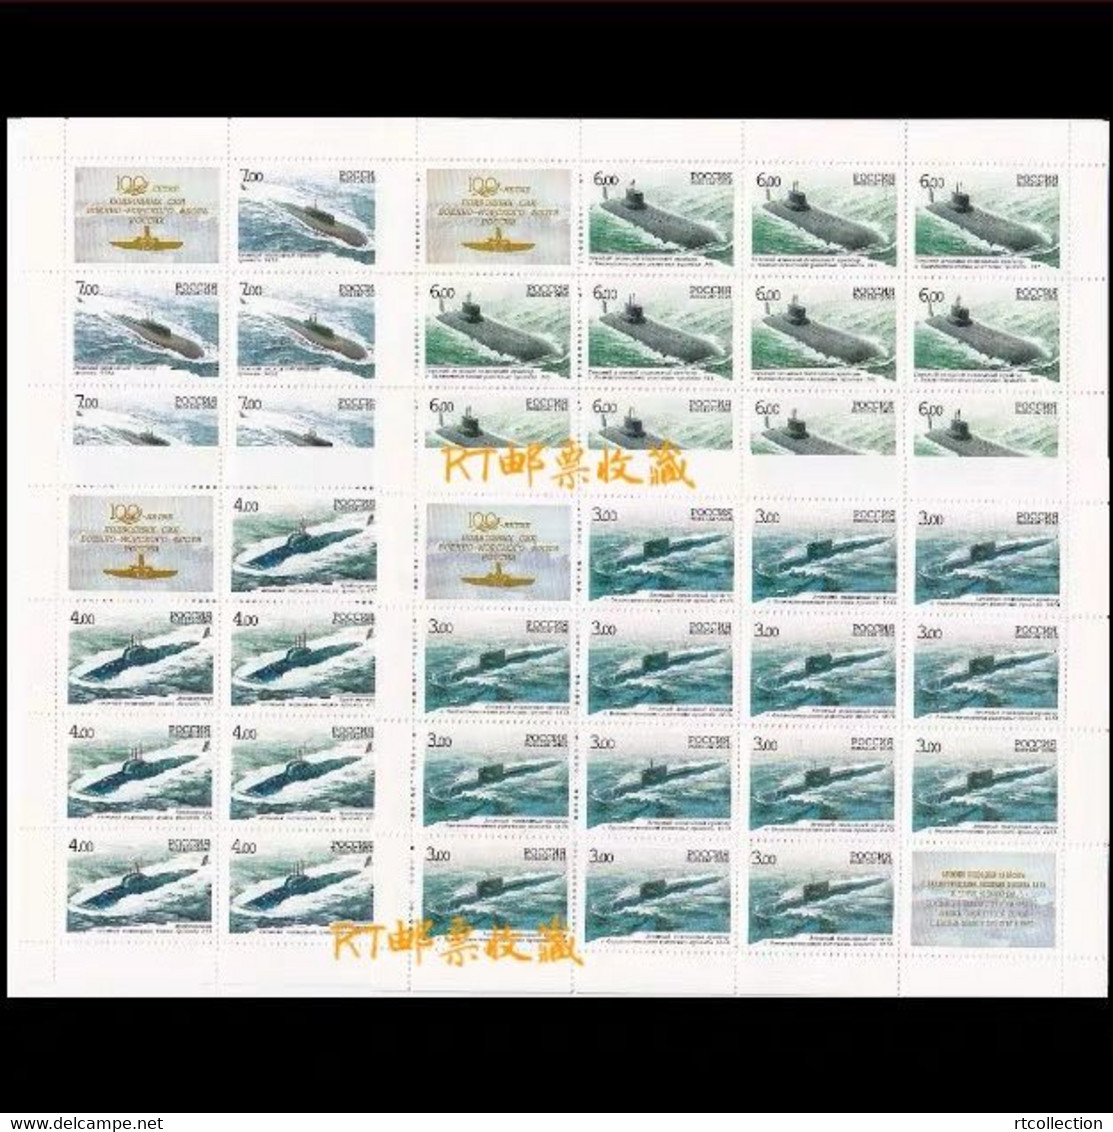 Russia 2006 Sheet 100th Anniversary Russian Submarine Forces Submarines Ships Transport Military Celebrations Stamps MNH - Volledige Vellen